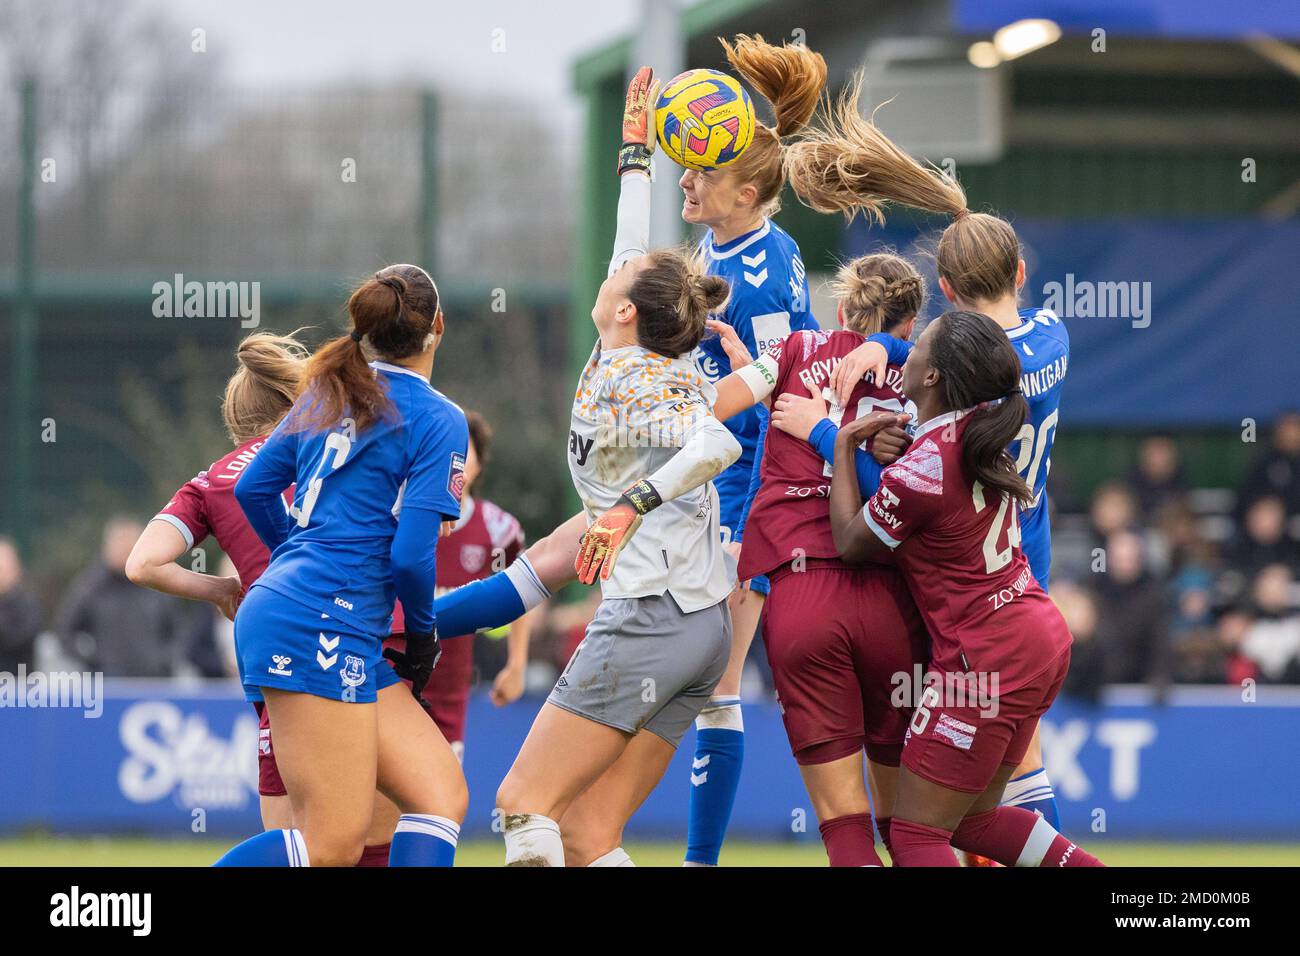 Liverpool, UK. 22nd Jan 2023. Karen Holmgaard of Everton Women wins a header during the The Fa Women's Super League match between Everton Women and West Ham Women at Walton Hall Park, Liverpool, United Kingdom, 22nd January 2023  (Photo by Phil Bryan/Alamy Live News) Stock Photo